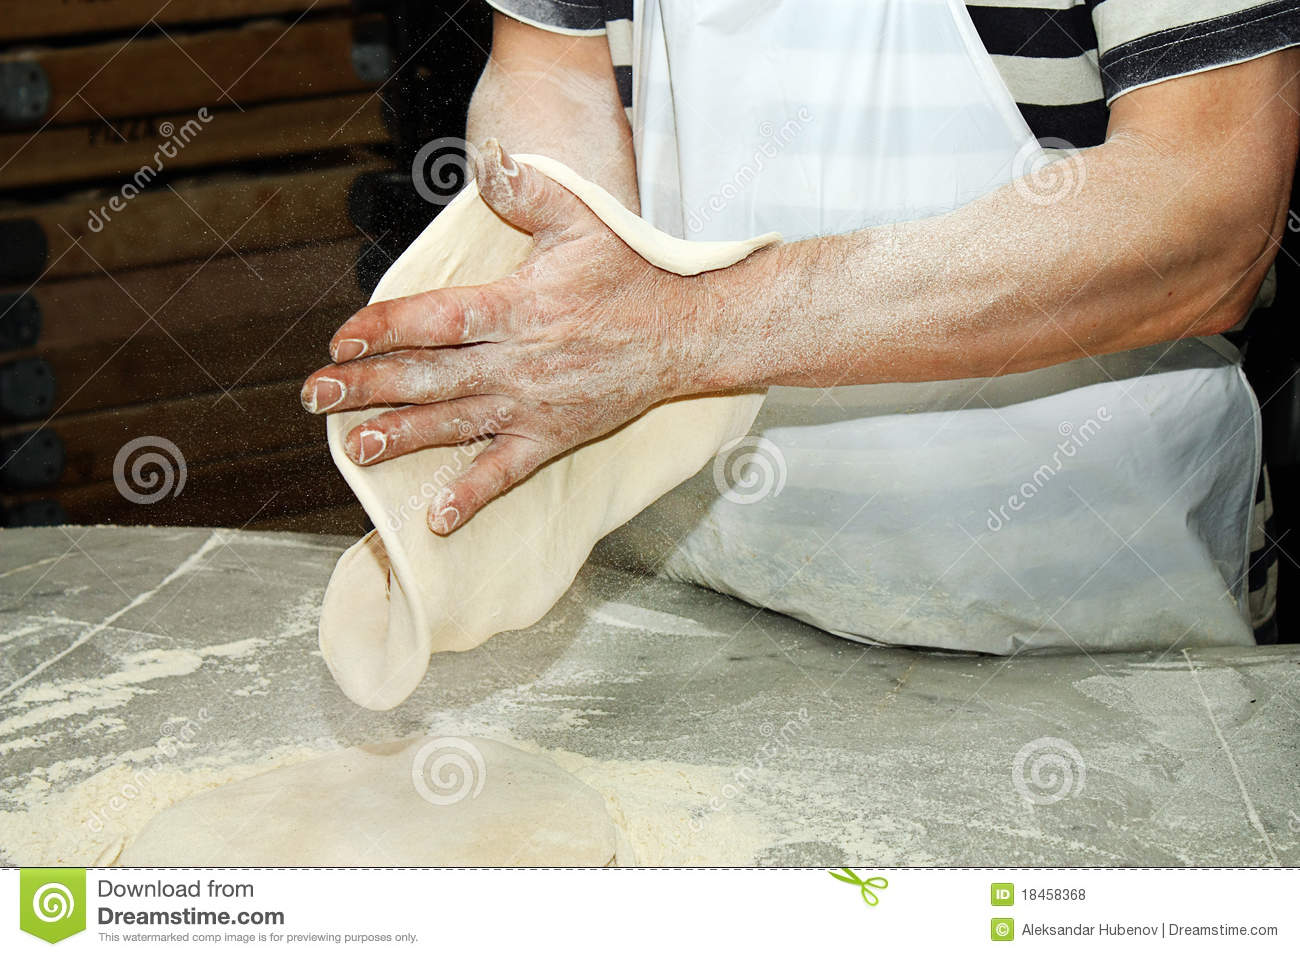 Chef Shaping Pizza Dough Royalty Free Stock Photos   Image  18458368